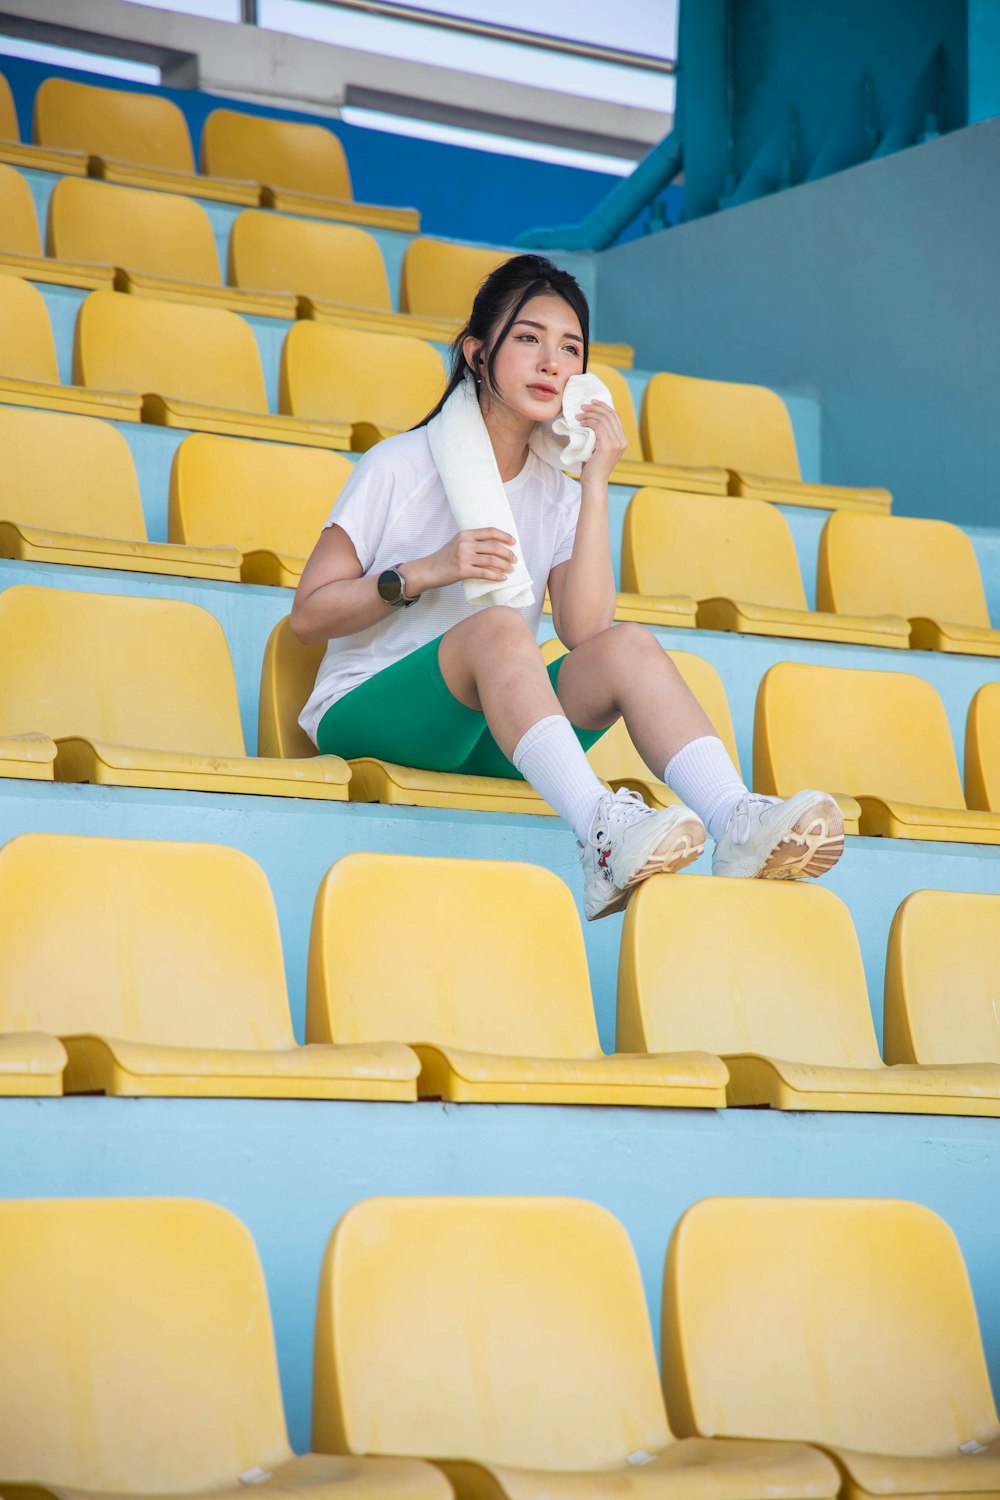 a woman sitting on the bleachers eating a donut